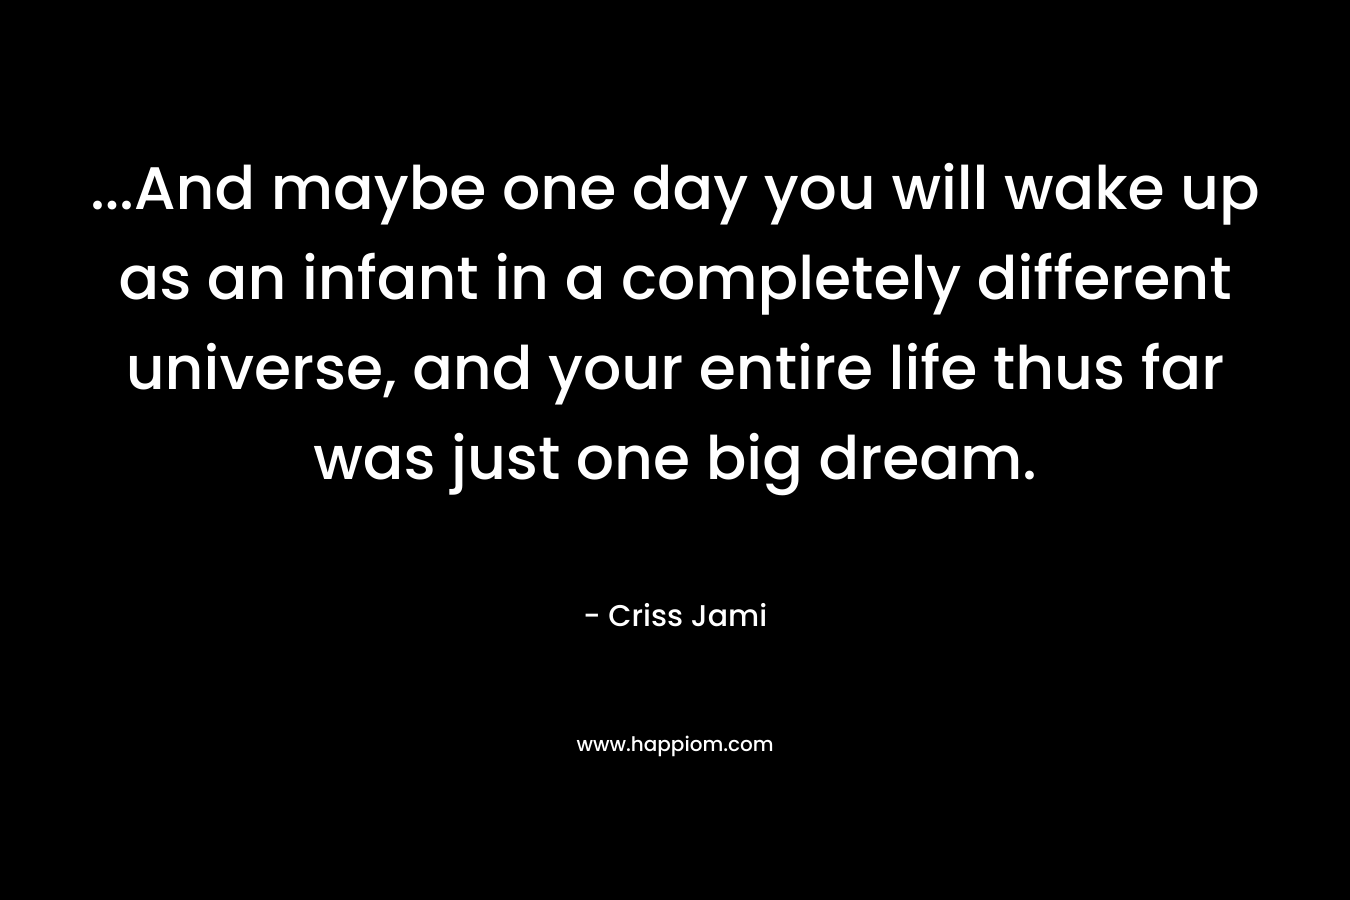 …And maybe one day you will wake up as an infant in a completely different universe, and your entire life thus far was just one big dream. – Criss Jami